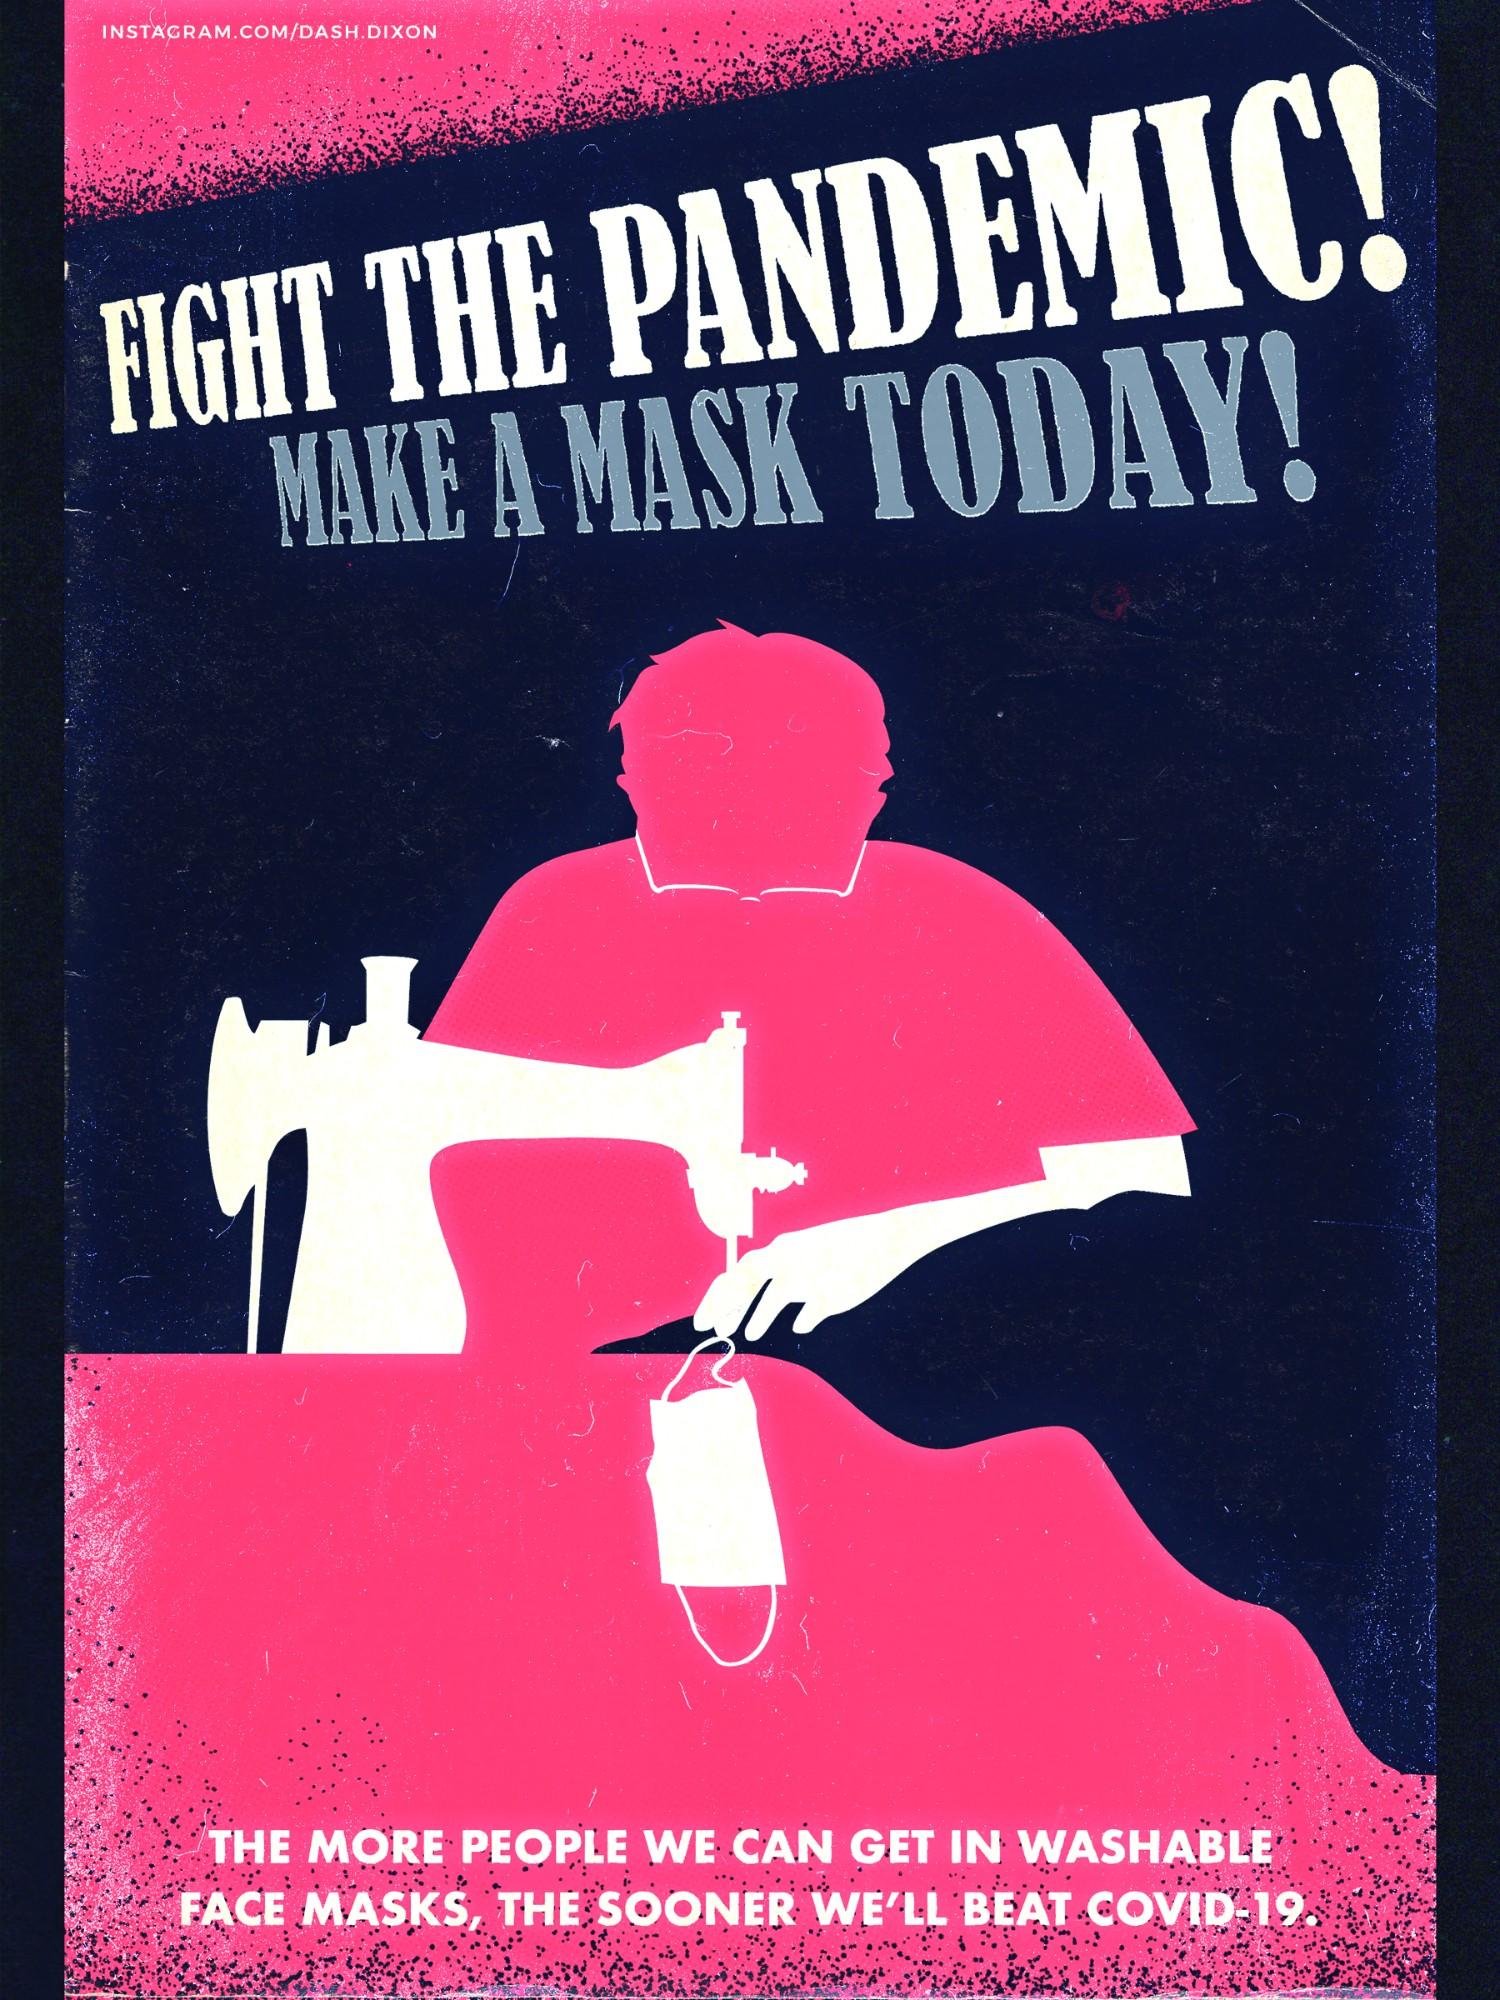 covid-19 propaganda poster with the text "fight the pandemic! make a mask today" with the outline of a figure bent at a sewing machine